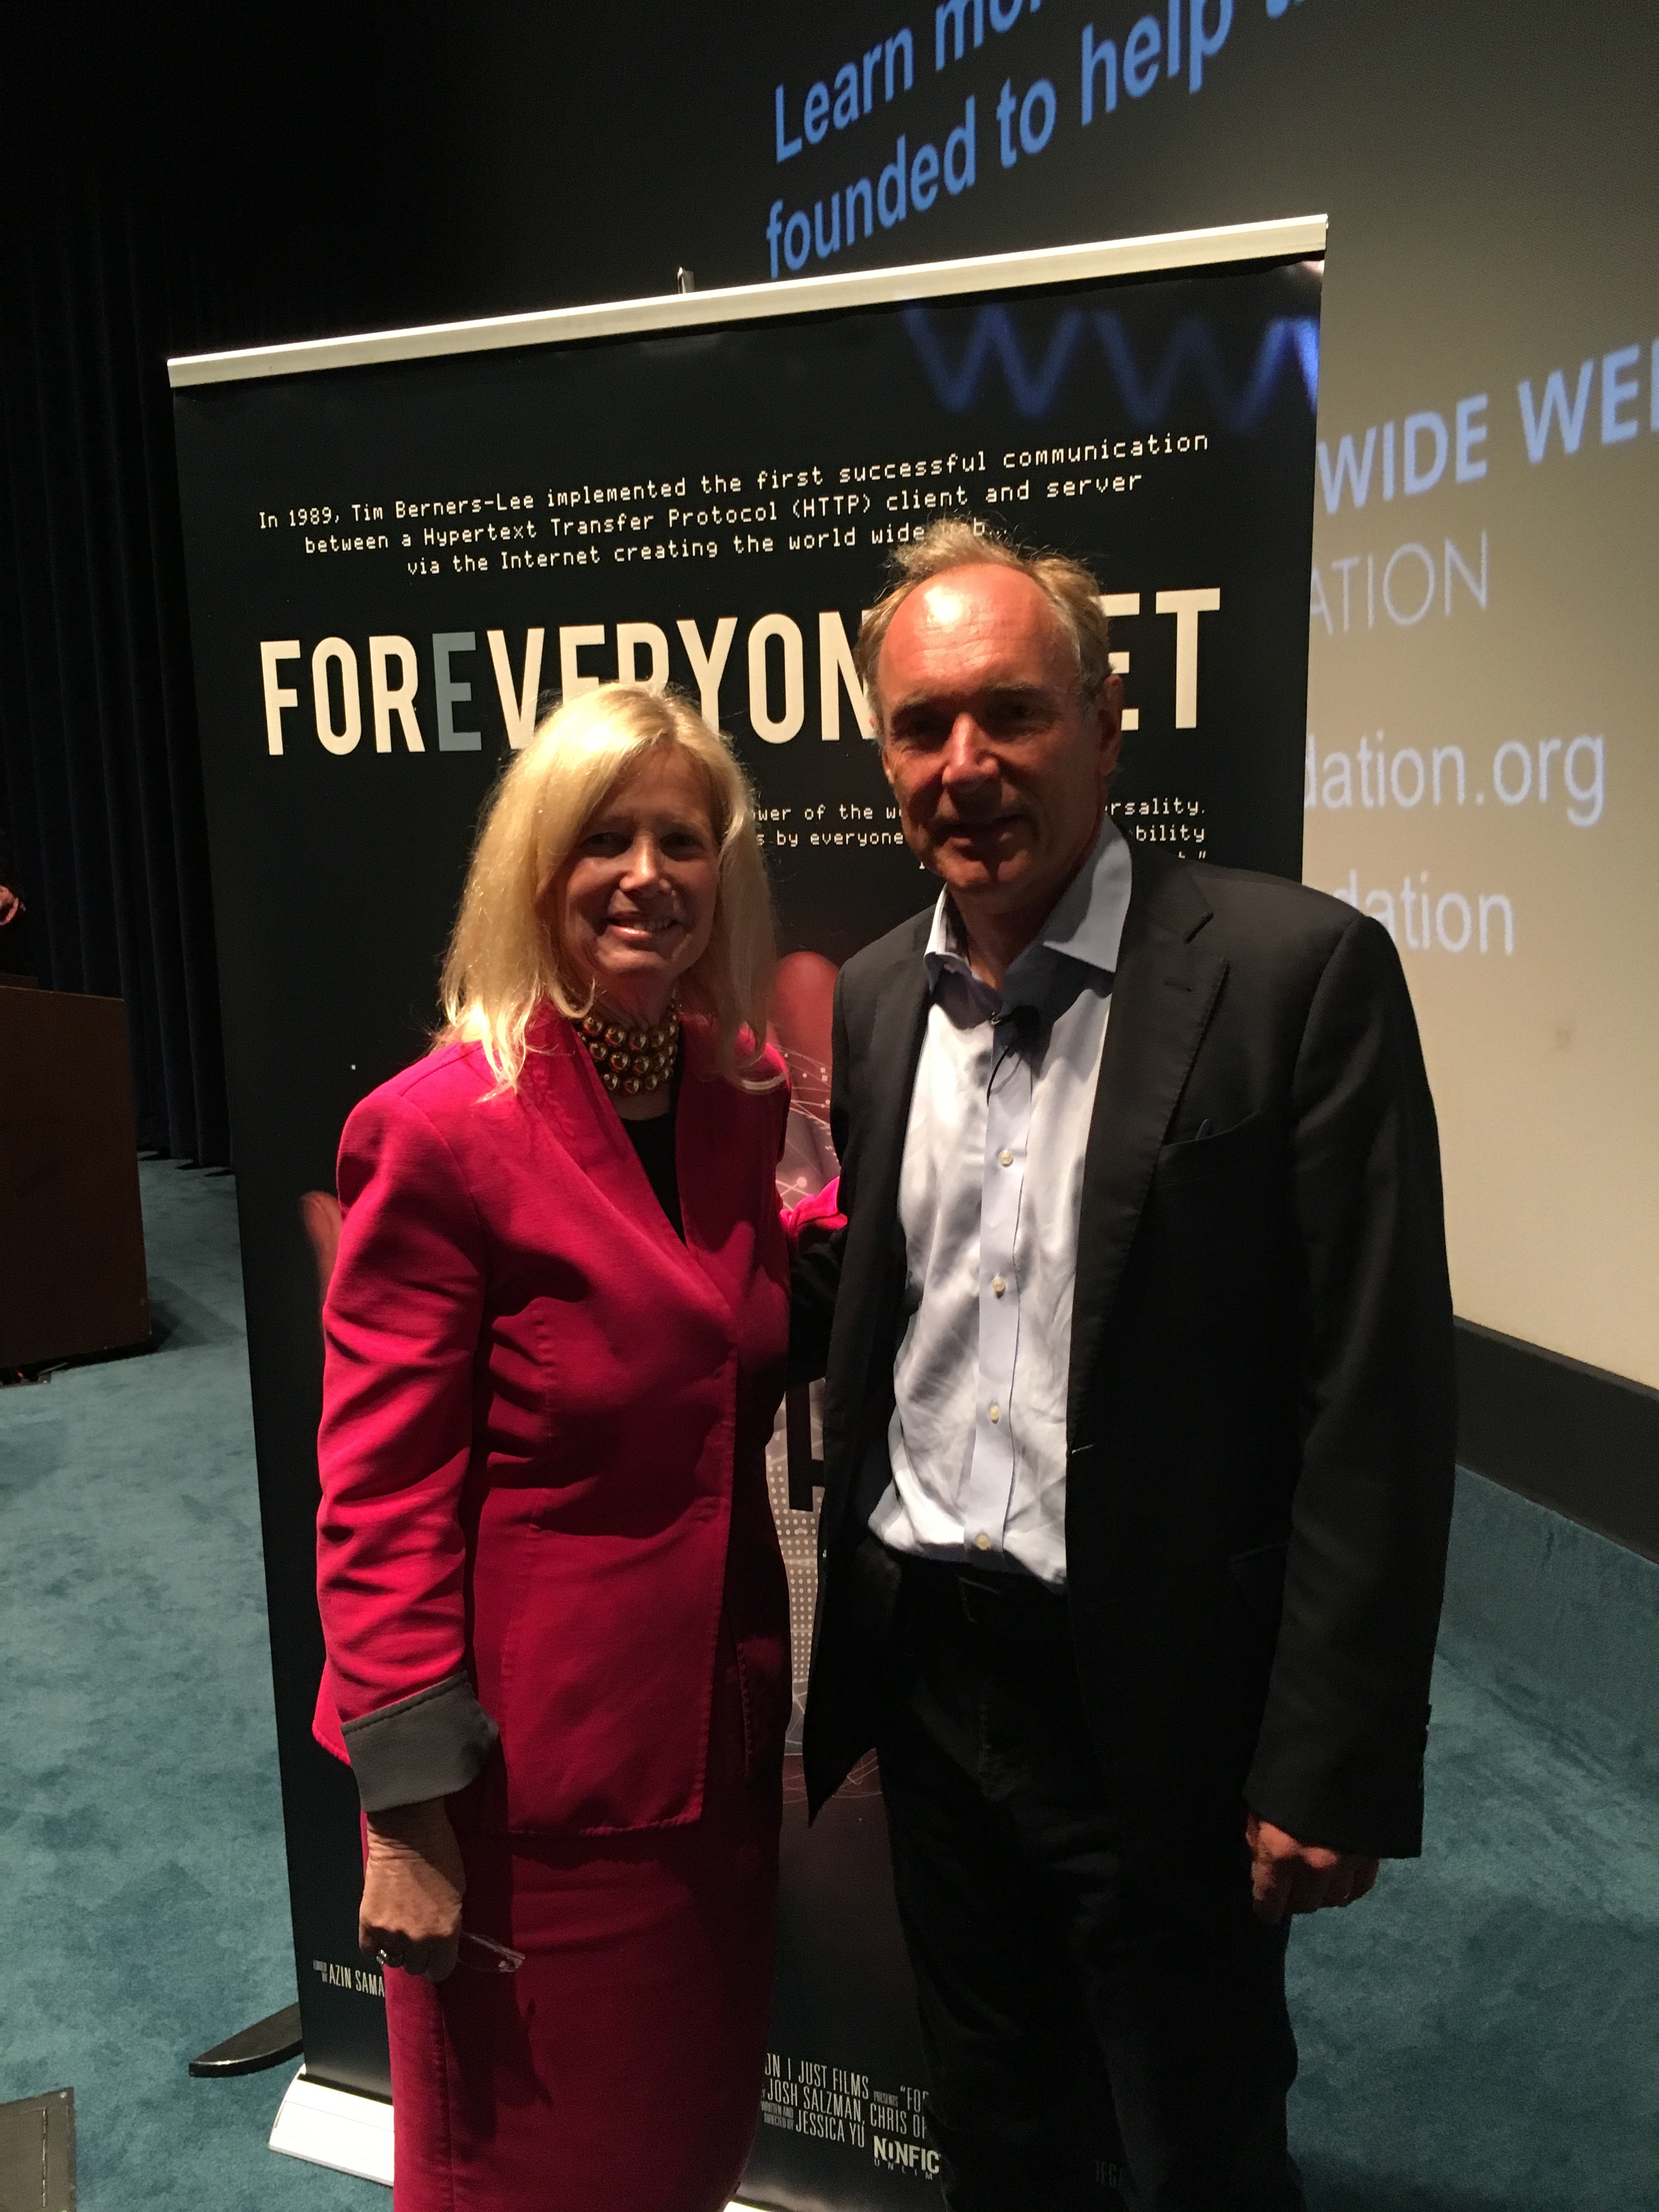 Dr. Susan Blumenthal with Sir Tim Berners-Lee, inventor of the World Wide Web, at the screening of a documentary celebrating his work.